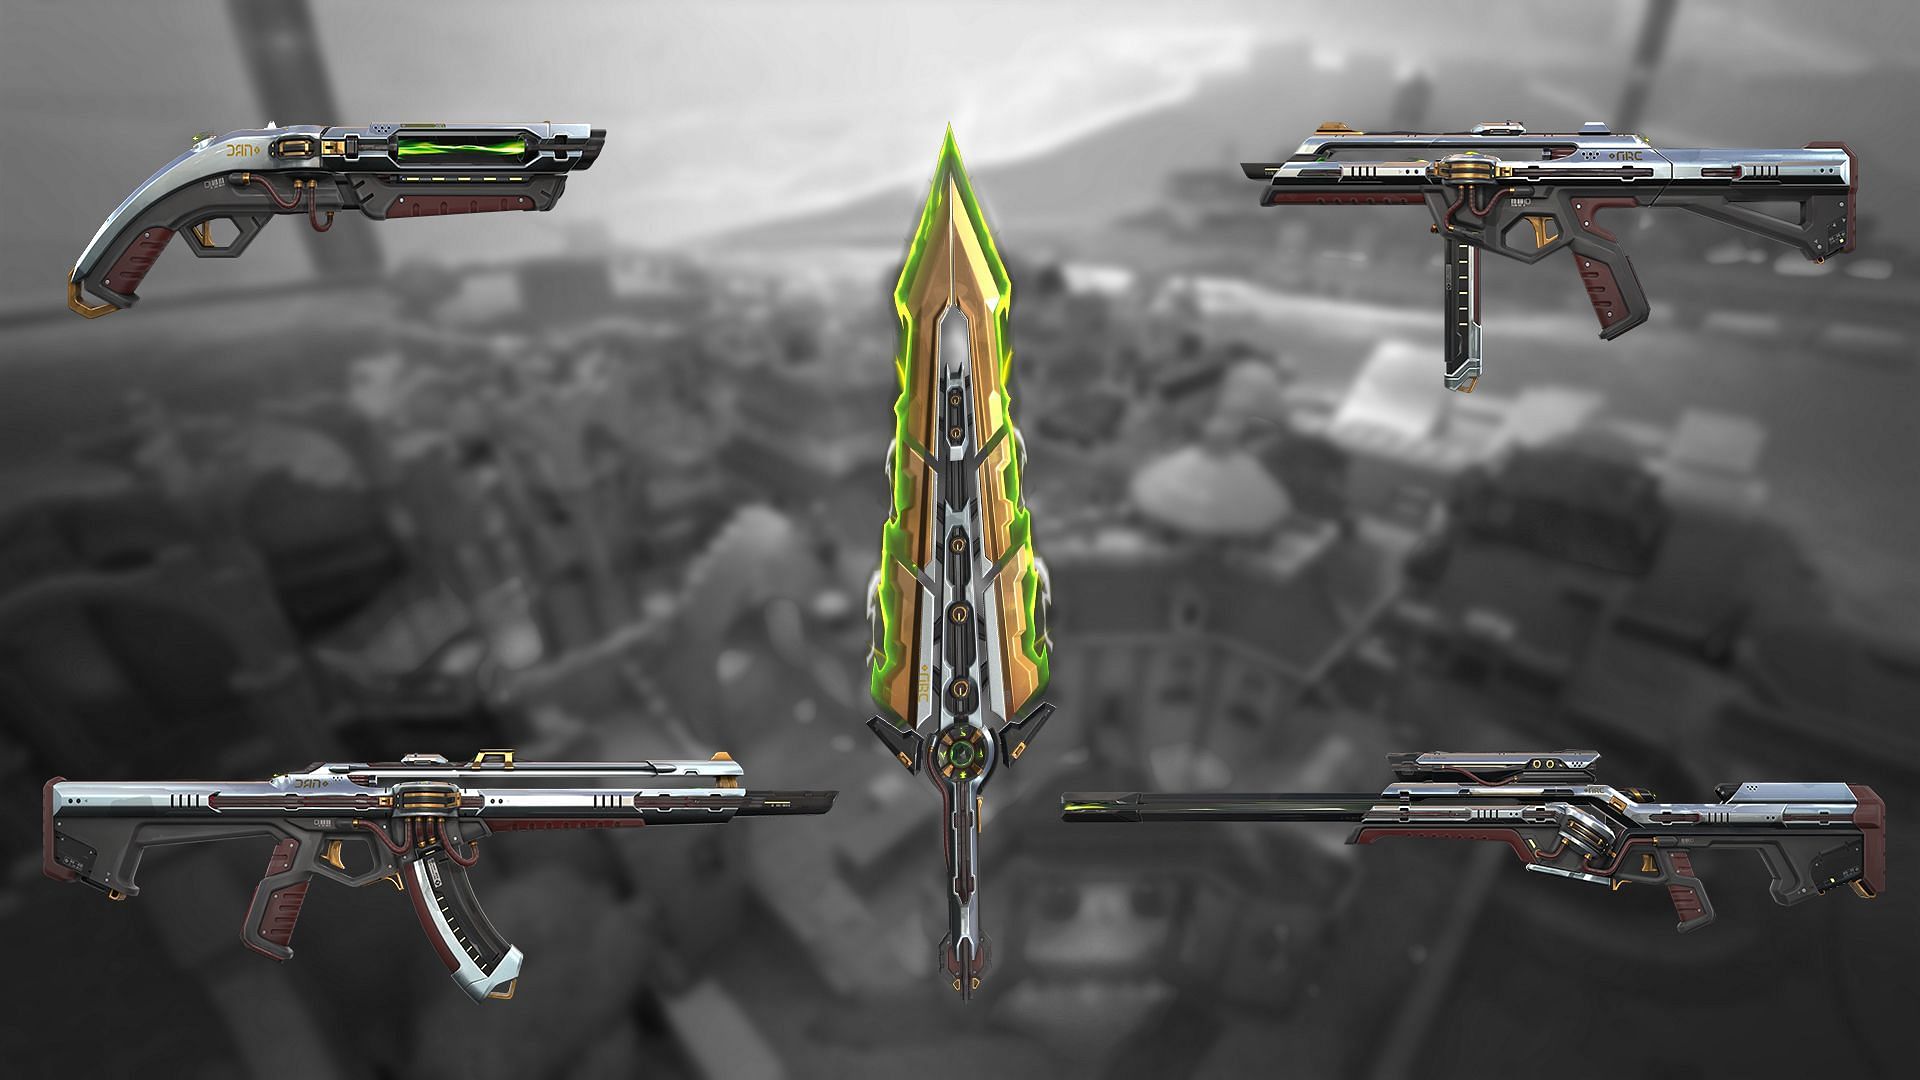 The Prelude to Chaos skinline in Valorant features some really interesting skins (Image via Sportskeeda)